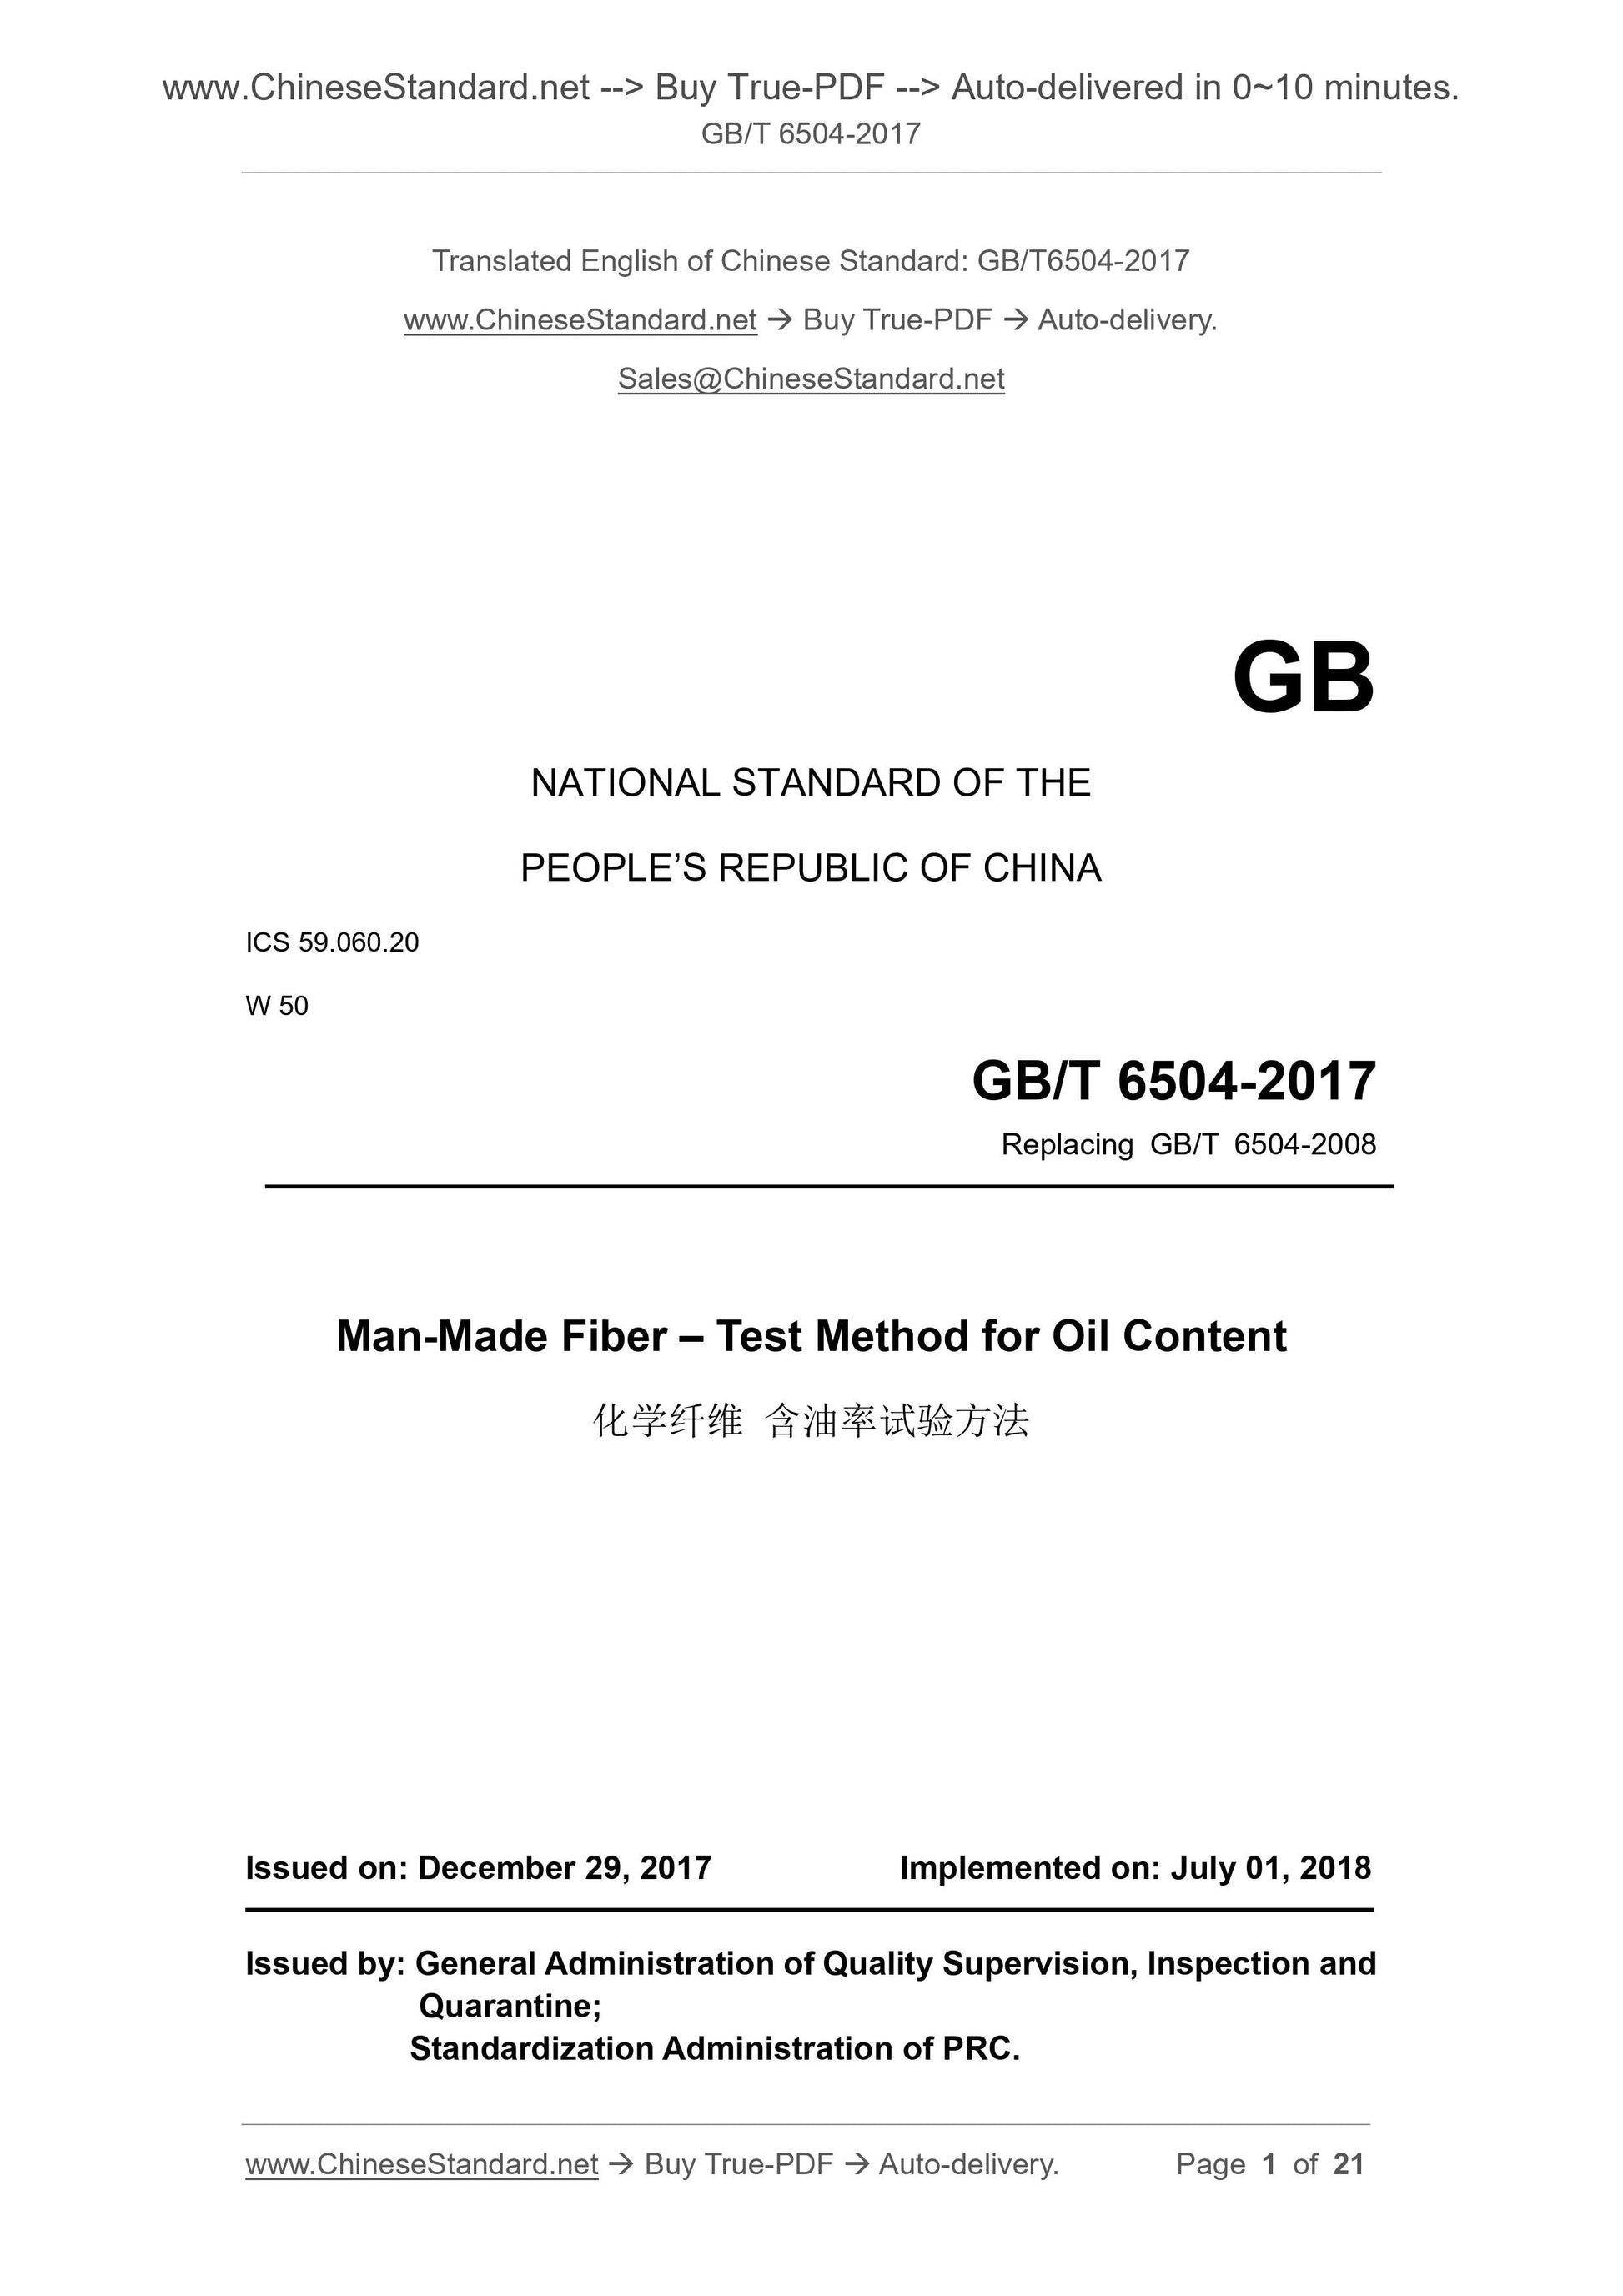 GB/T 6504-2017 Page 1